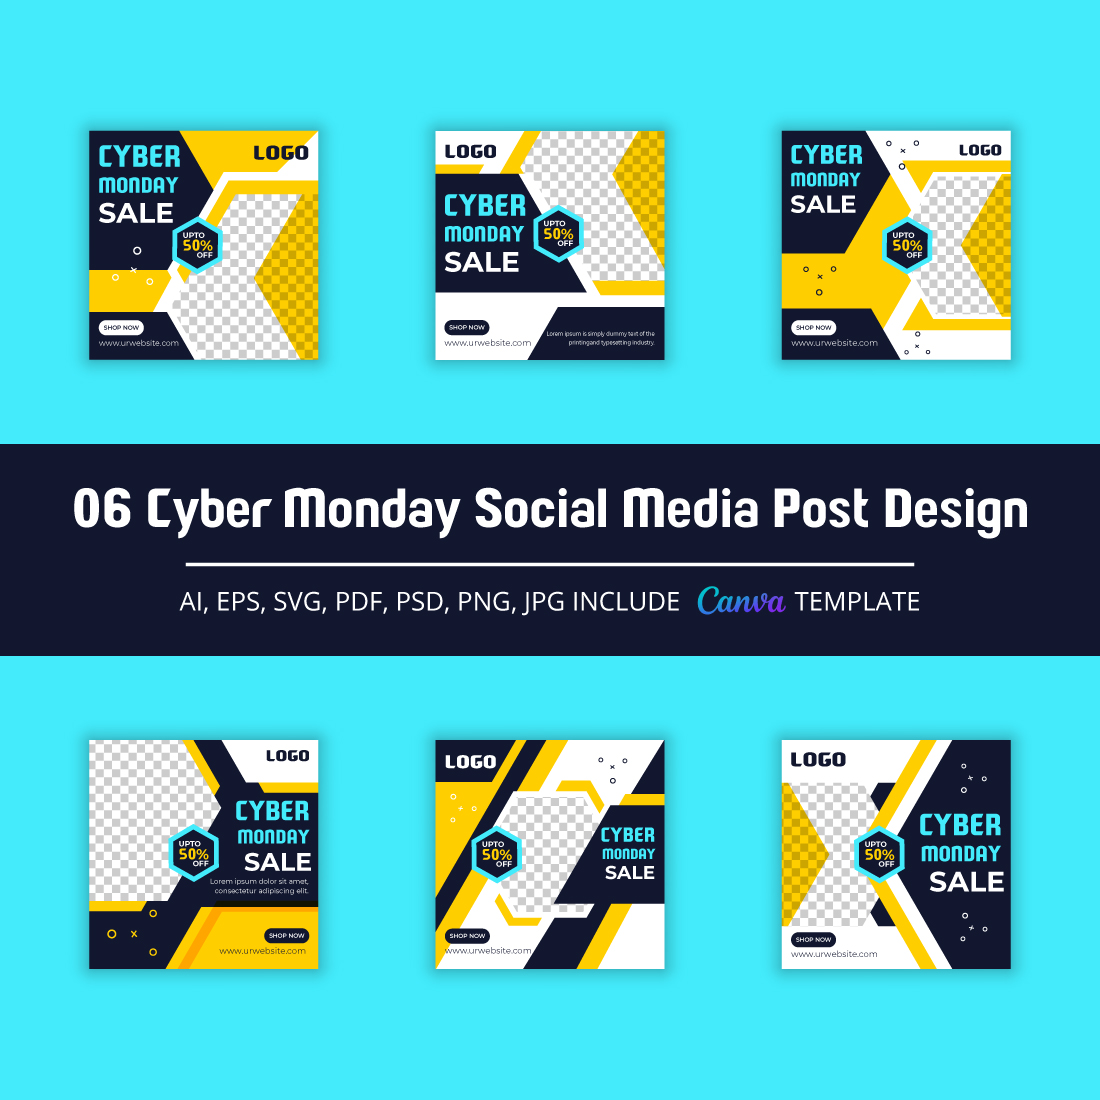 Cyber Monday Super Sale Social Media Post Template Pack Vol-01 cover image.